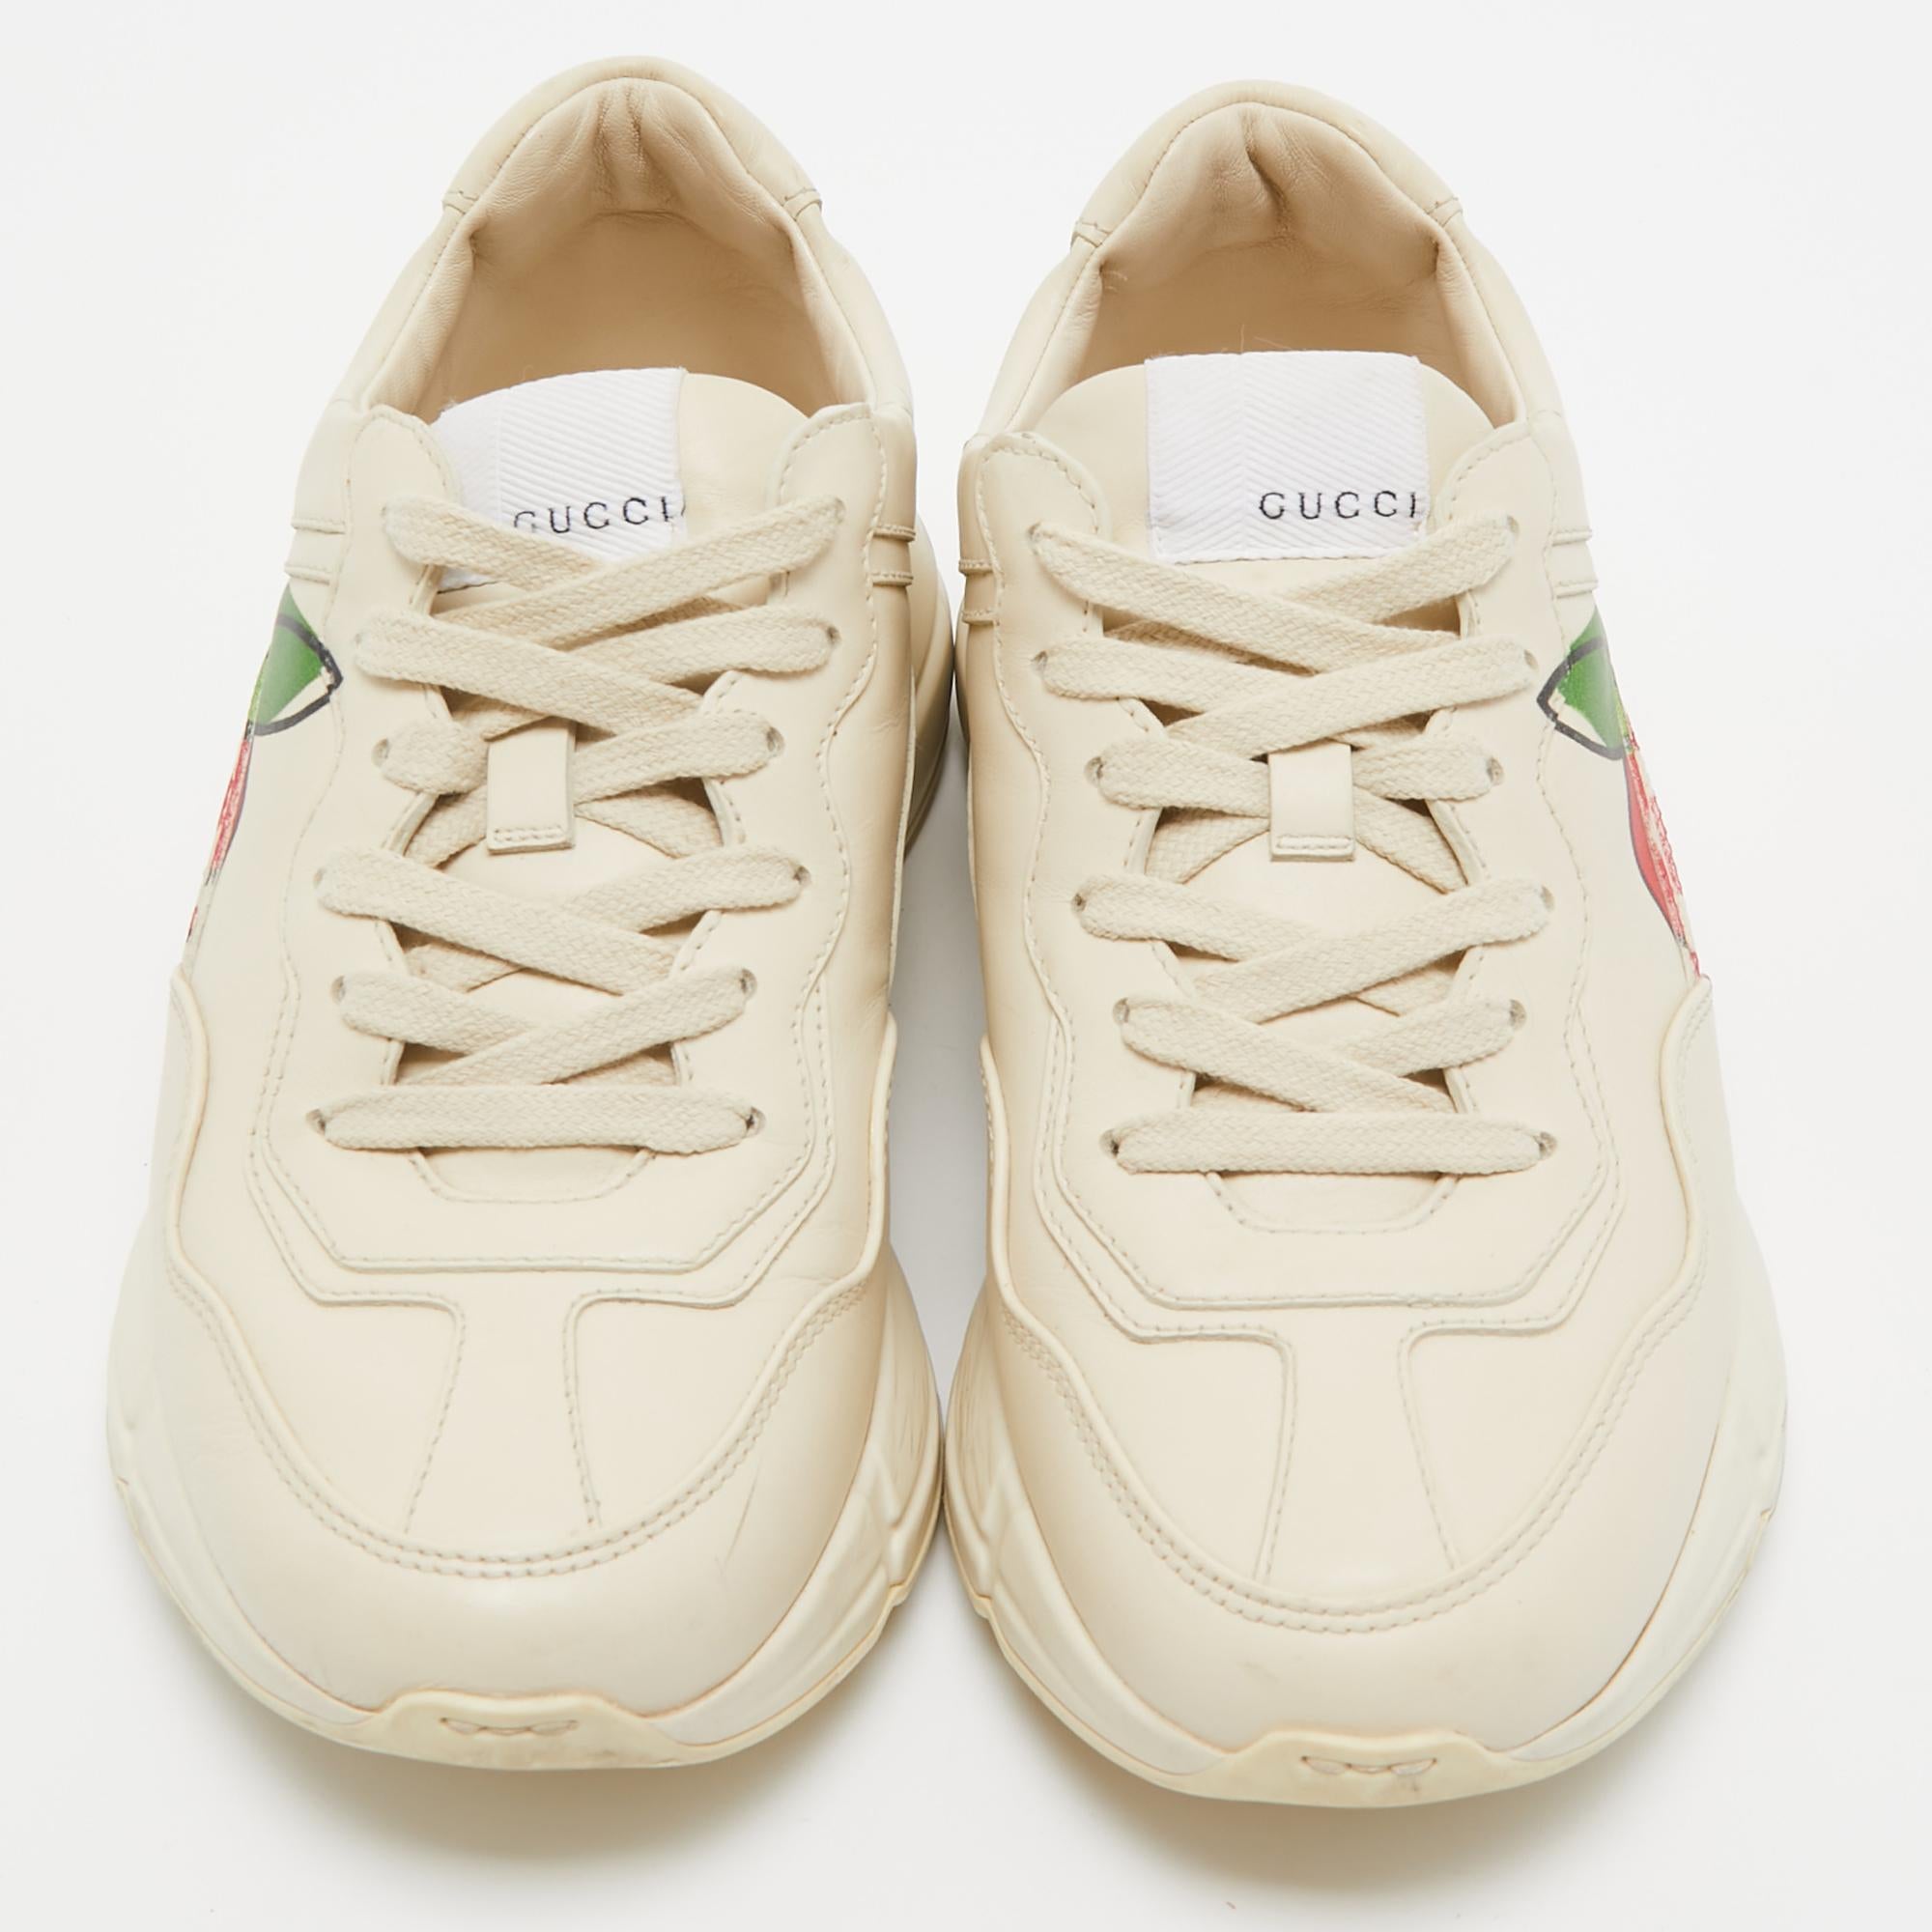 The time to feel trendy is now as Gucci brings you these superhit sneakers in a cream shade. They are crafted from leather, detailed with lace-ups, signature elements, and are set on highly comfortable soles. You are sure to receive nods of approval